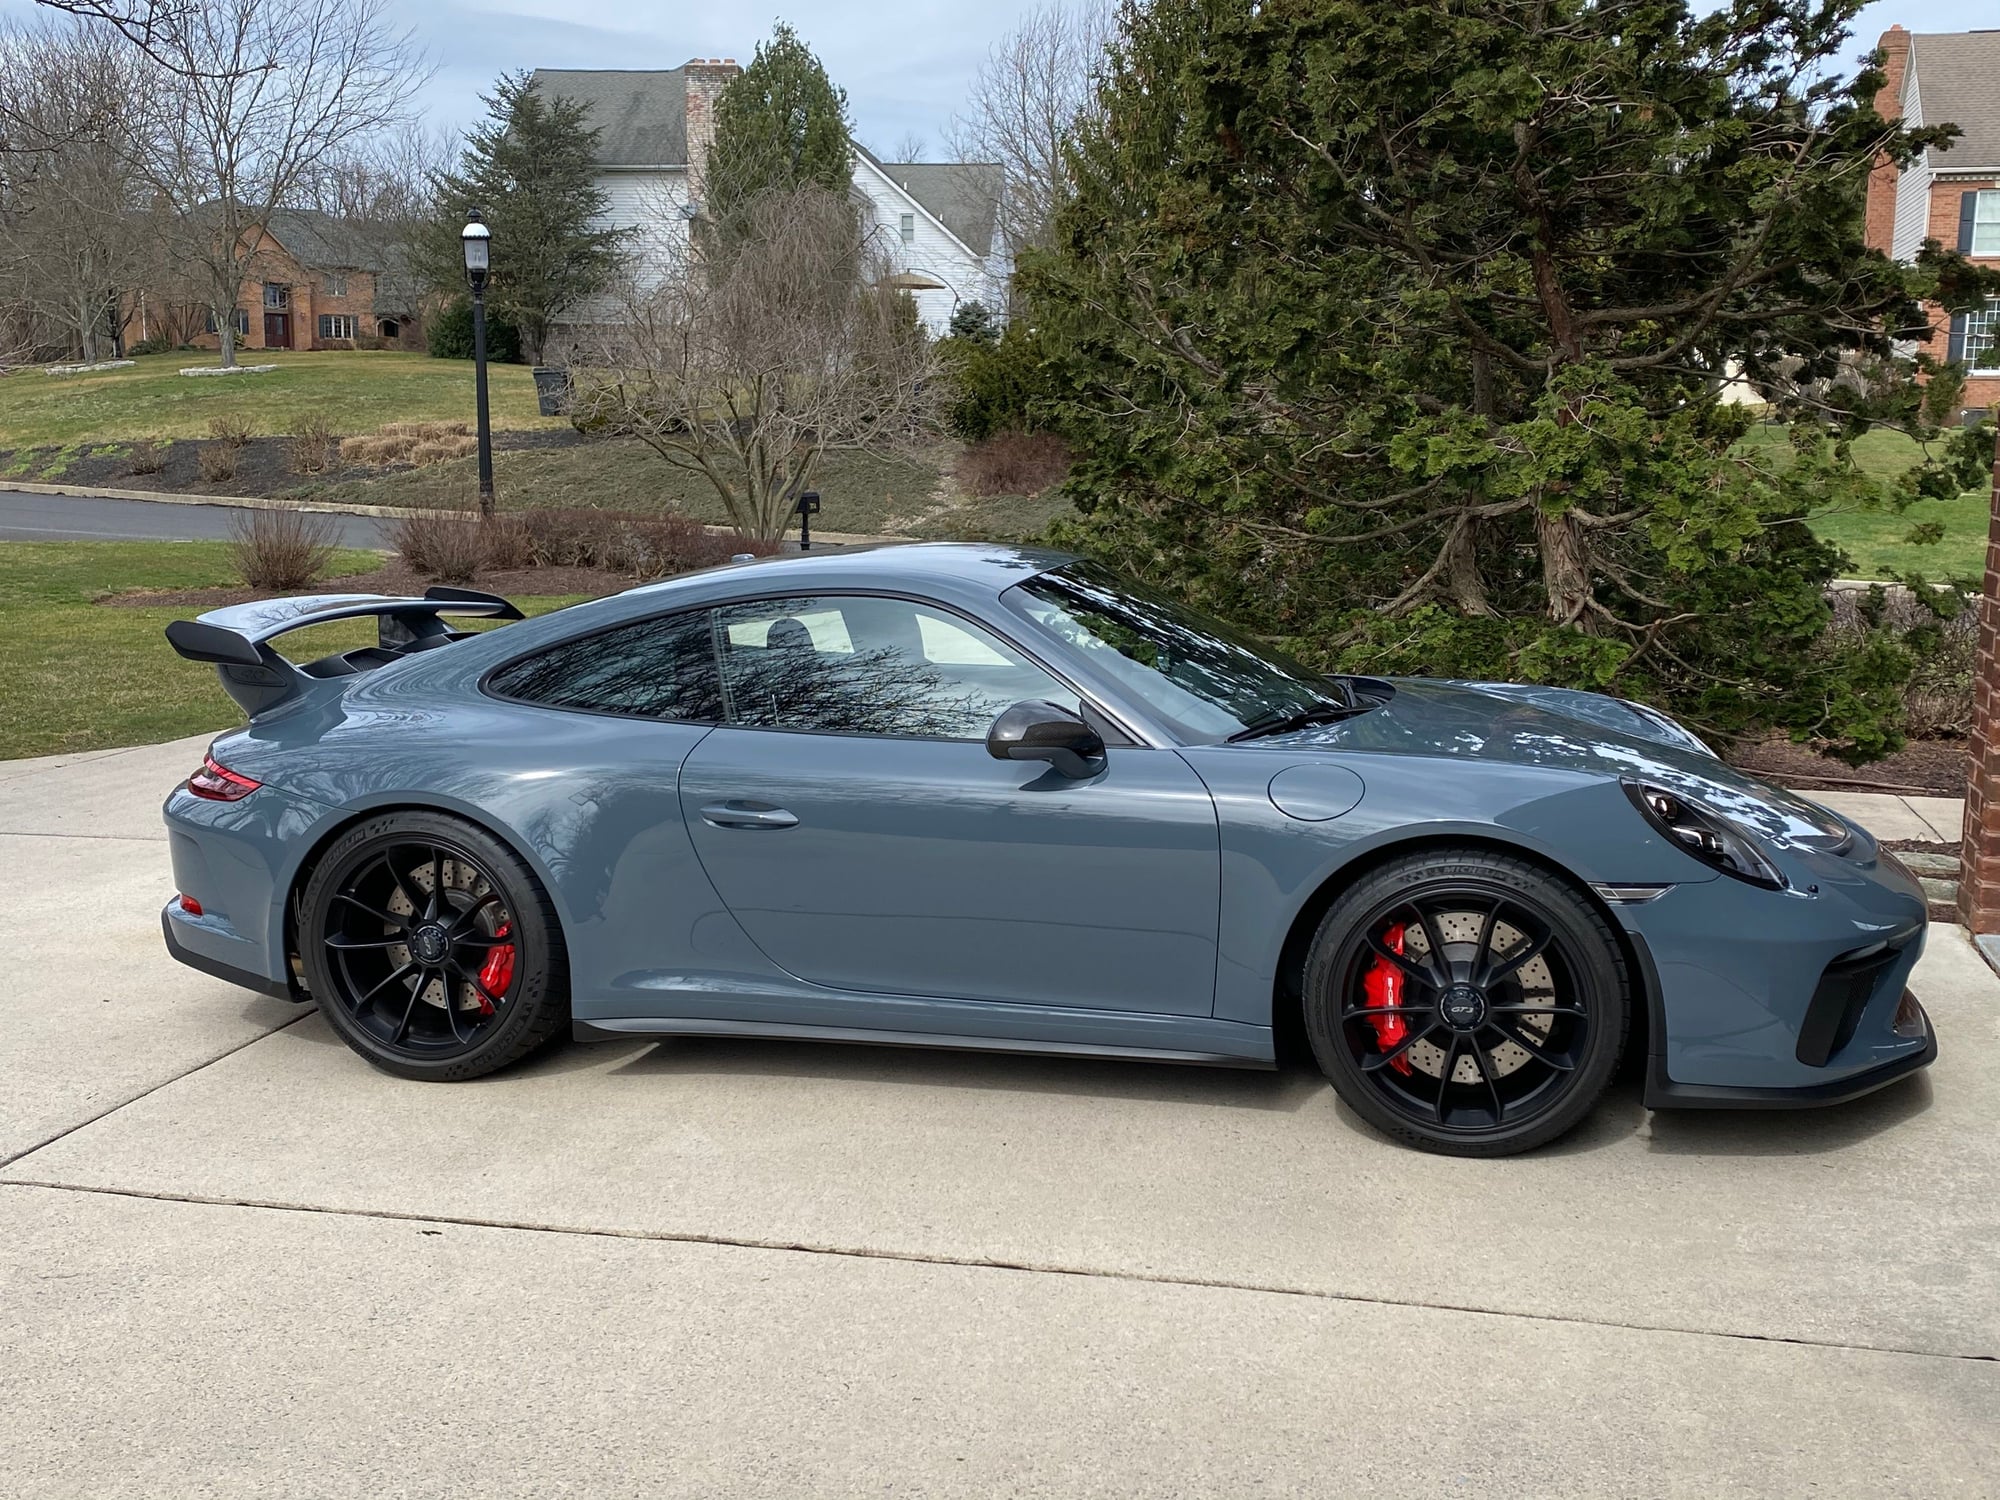 2018 Porsche GT3 - 2018 GT3 (991.2) Graphite Blue Metallic Nicely optioned - Used - VIN WP0AC2A96JS174360 - 3,050 Miles - 6 cyl - 2WD - Automatic - Coupe - Mechanicsburg, PA 17050, United States